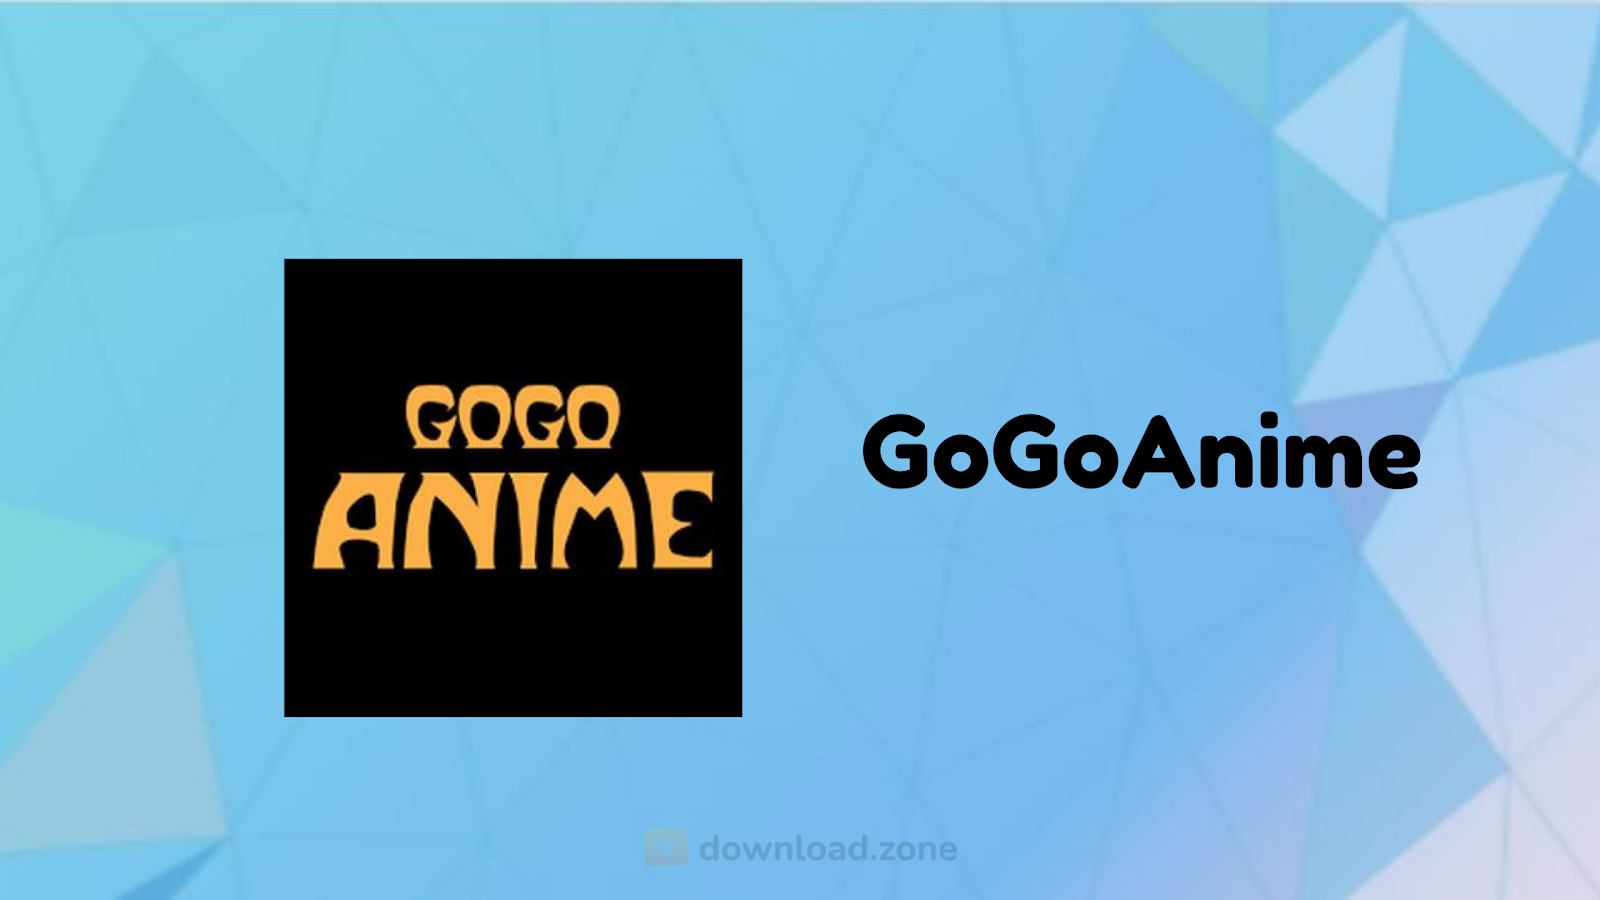 The Popularity of the Gogo Anime App